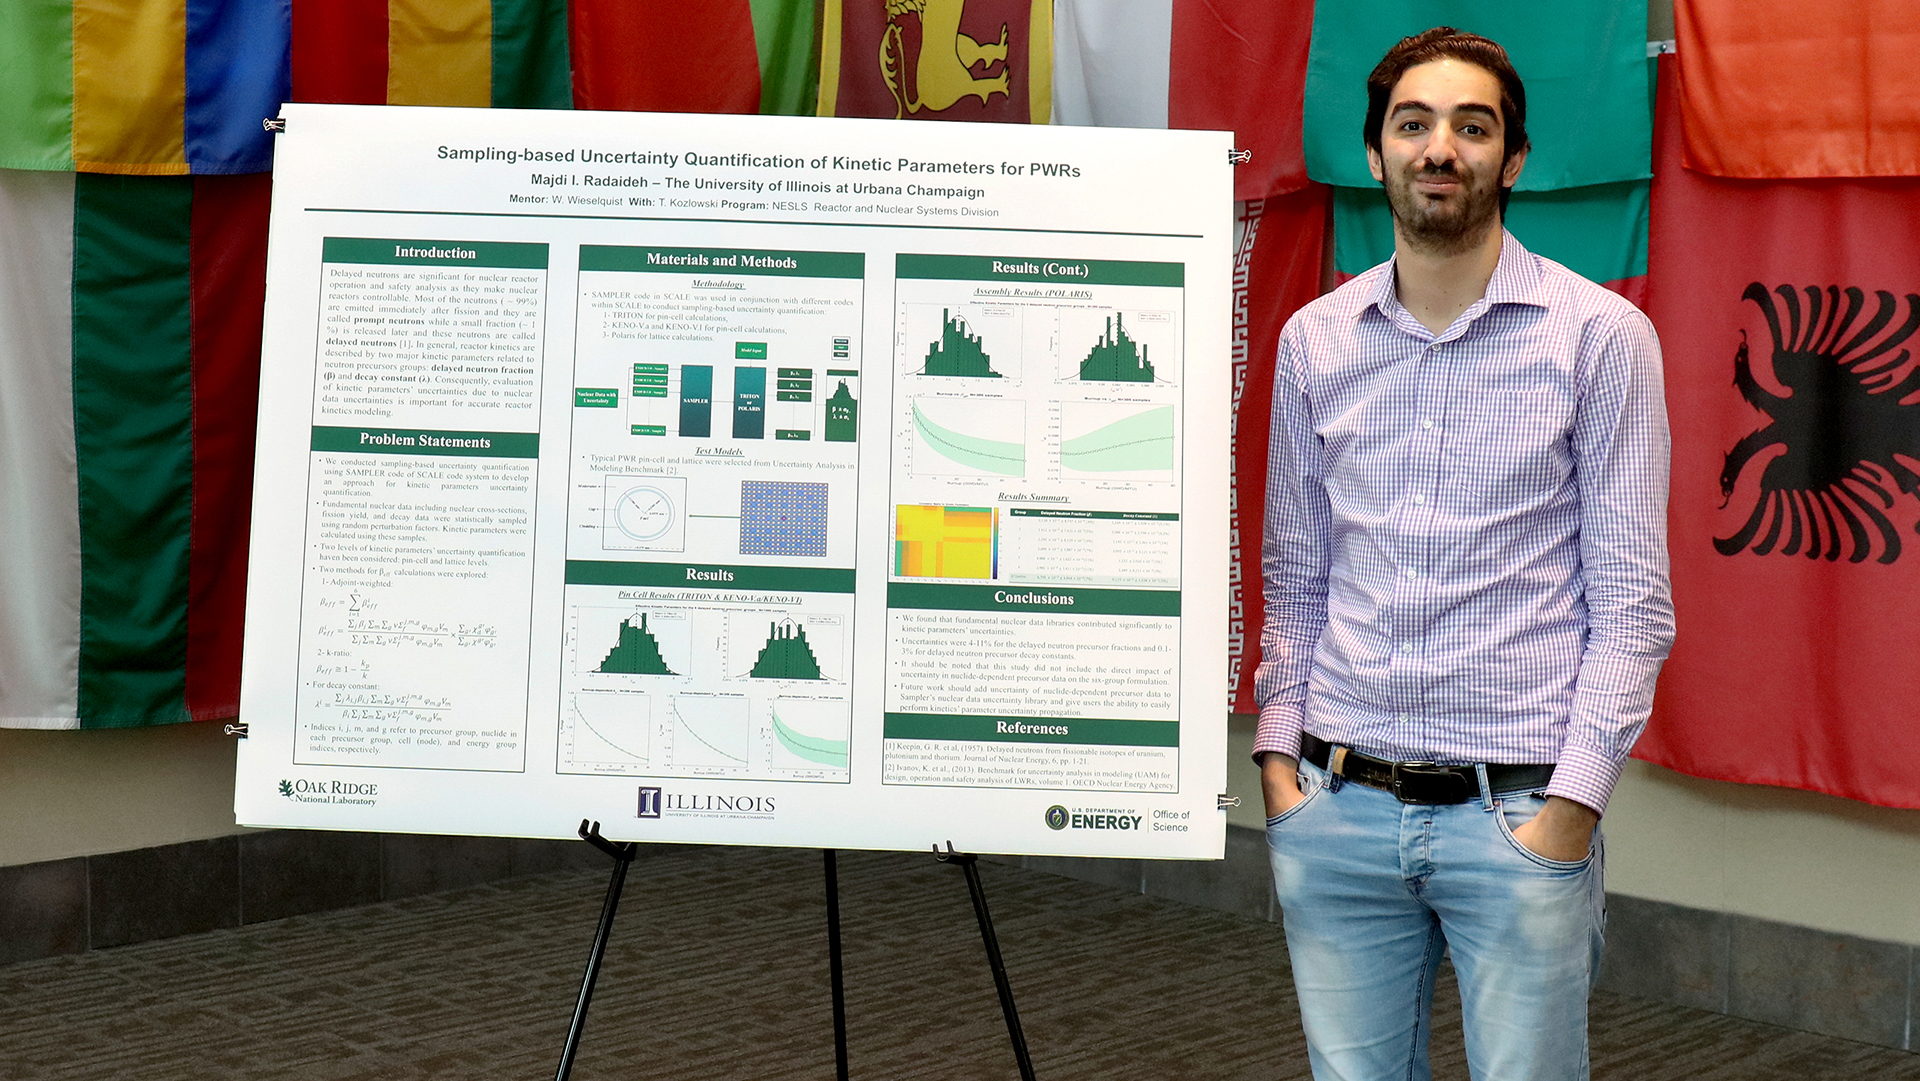 NPRE PhD student gains ORNL recognition for nuclear modeling, uncertainty quantification work